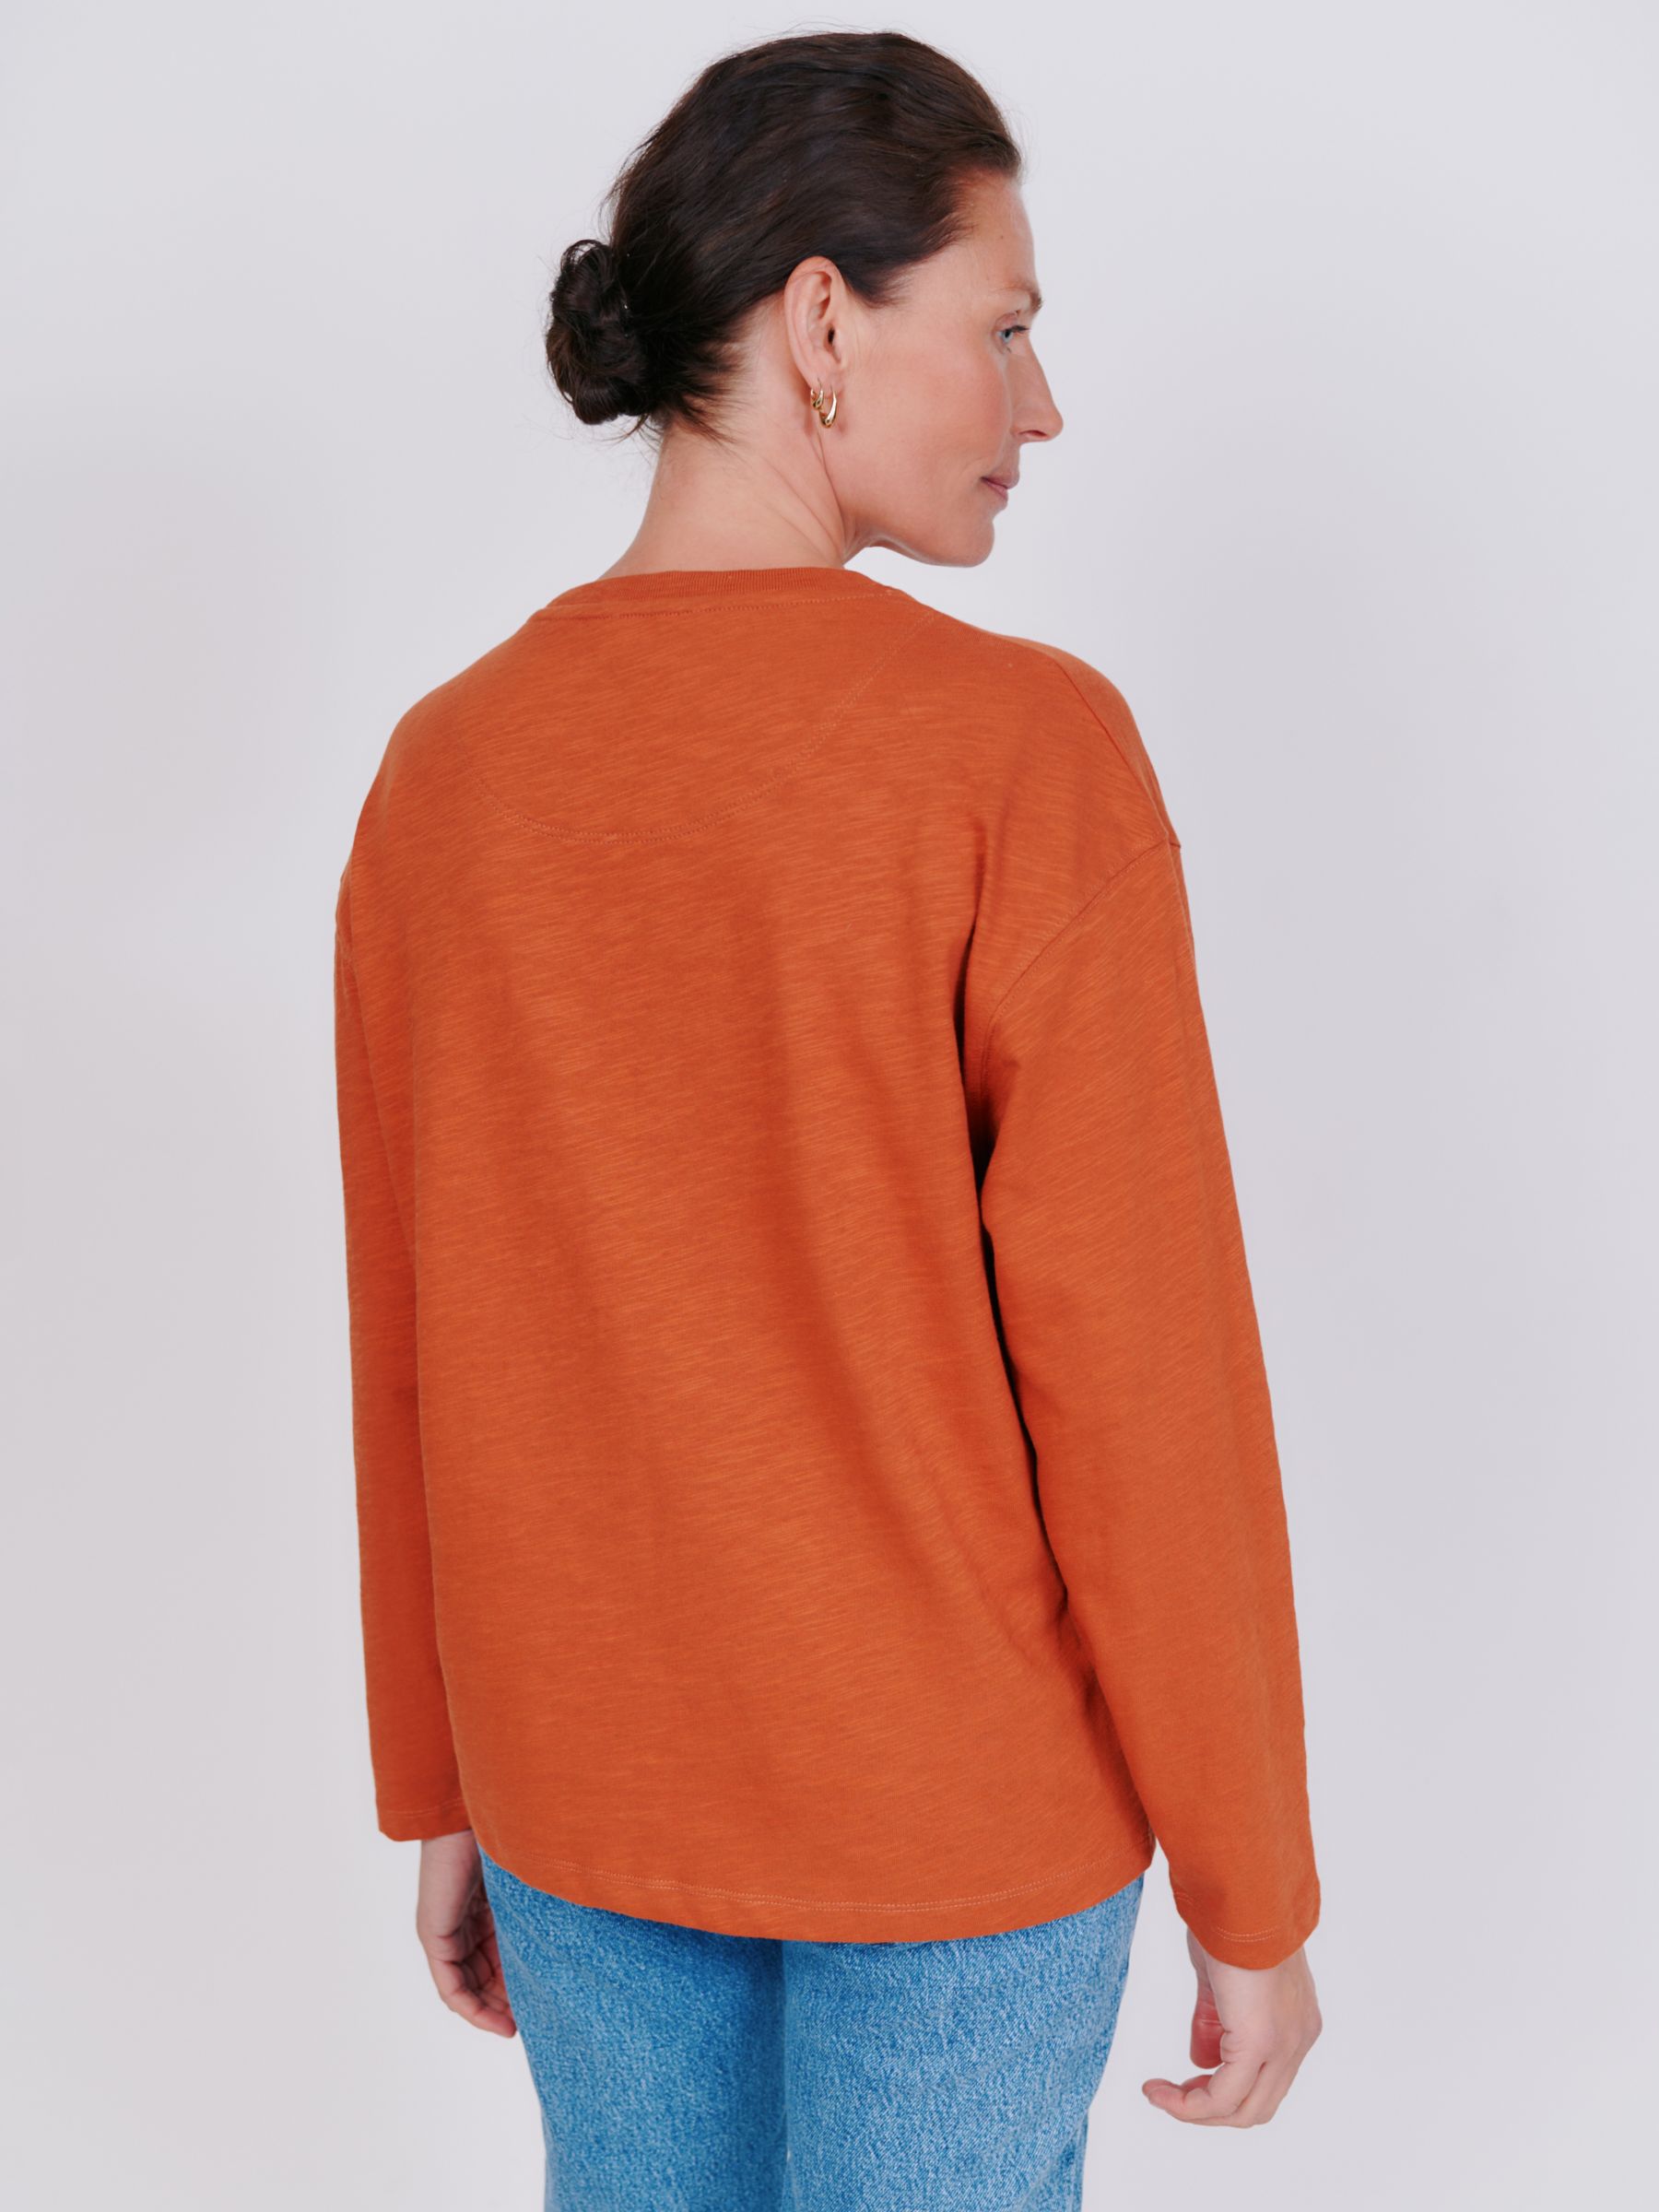 Buy Vivere By Savannah Miller Mae Cotton Jersey Top, Rust Online at johnlewis.com